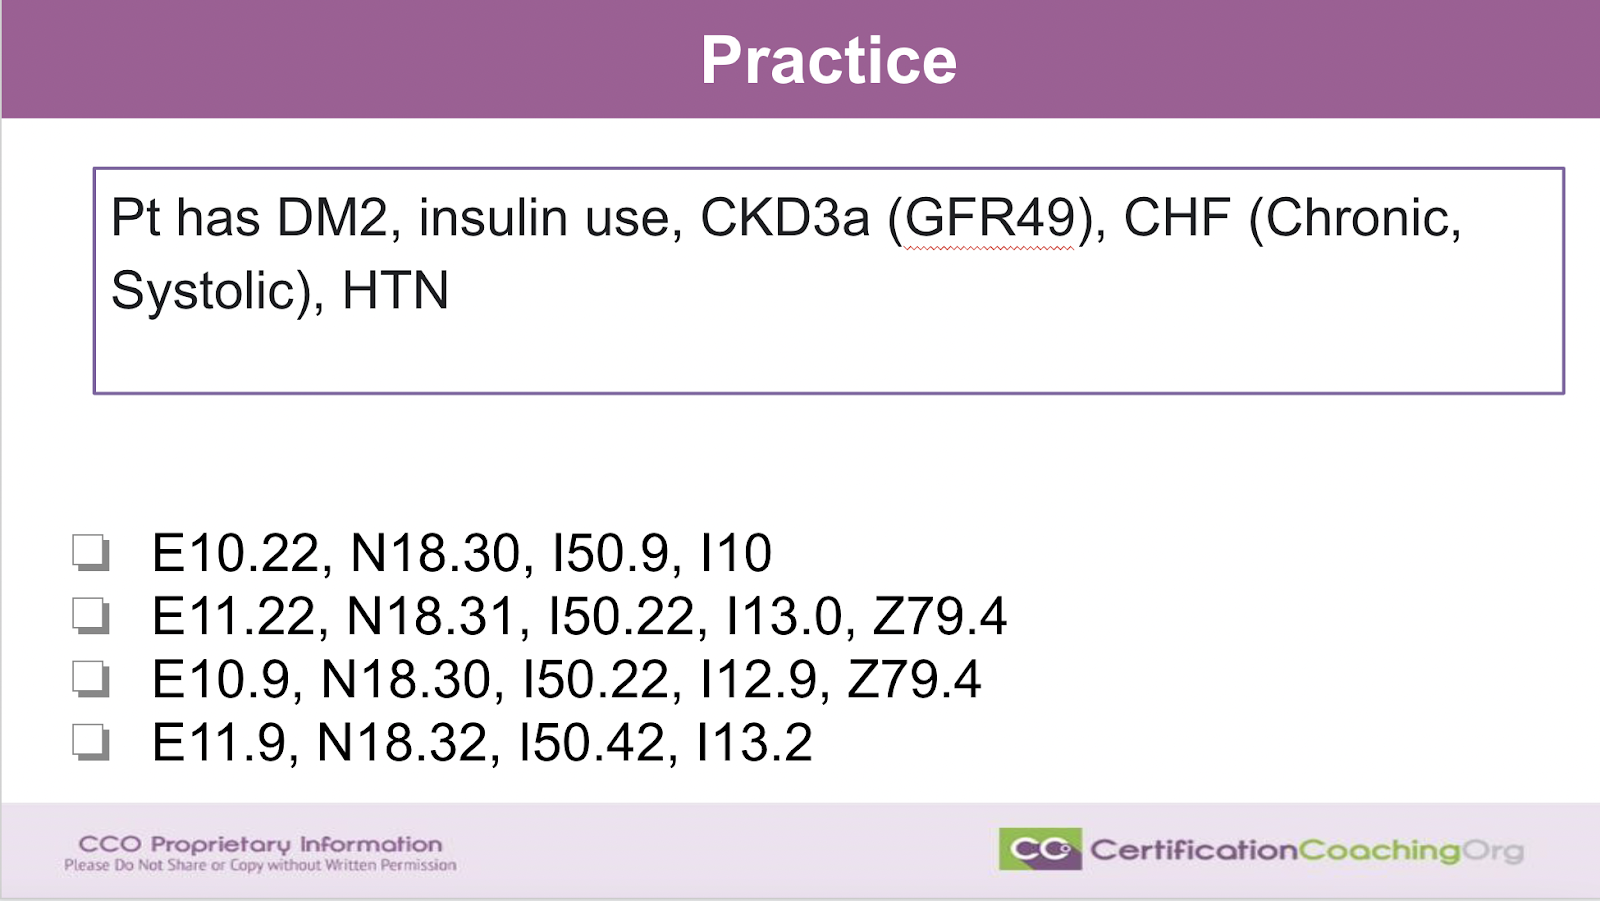 ICD-10 Practice 3